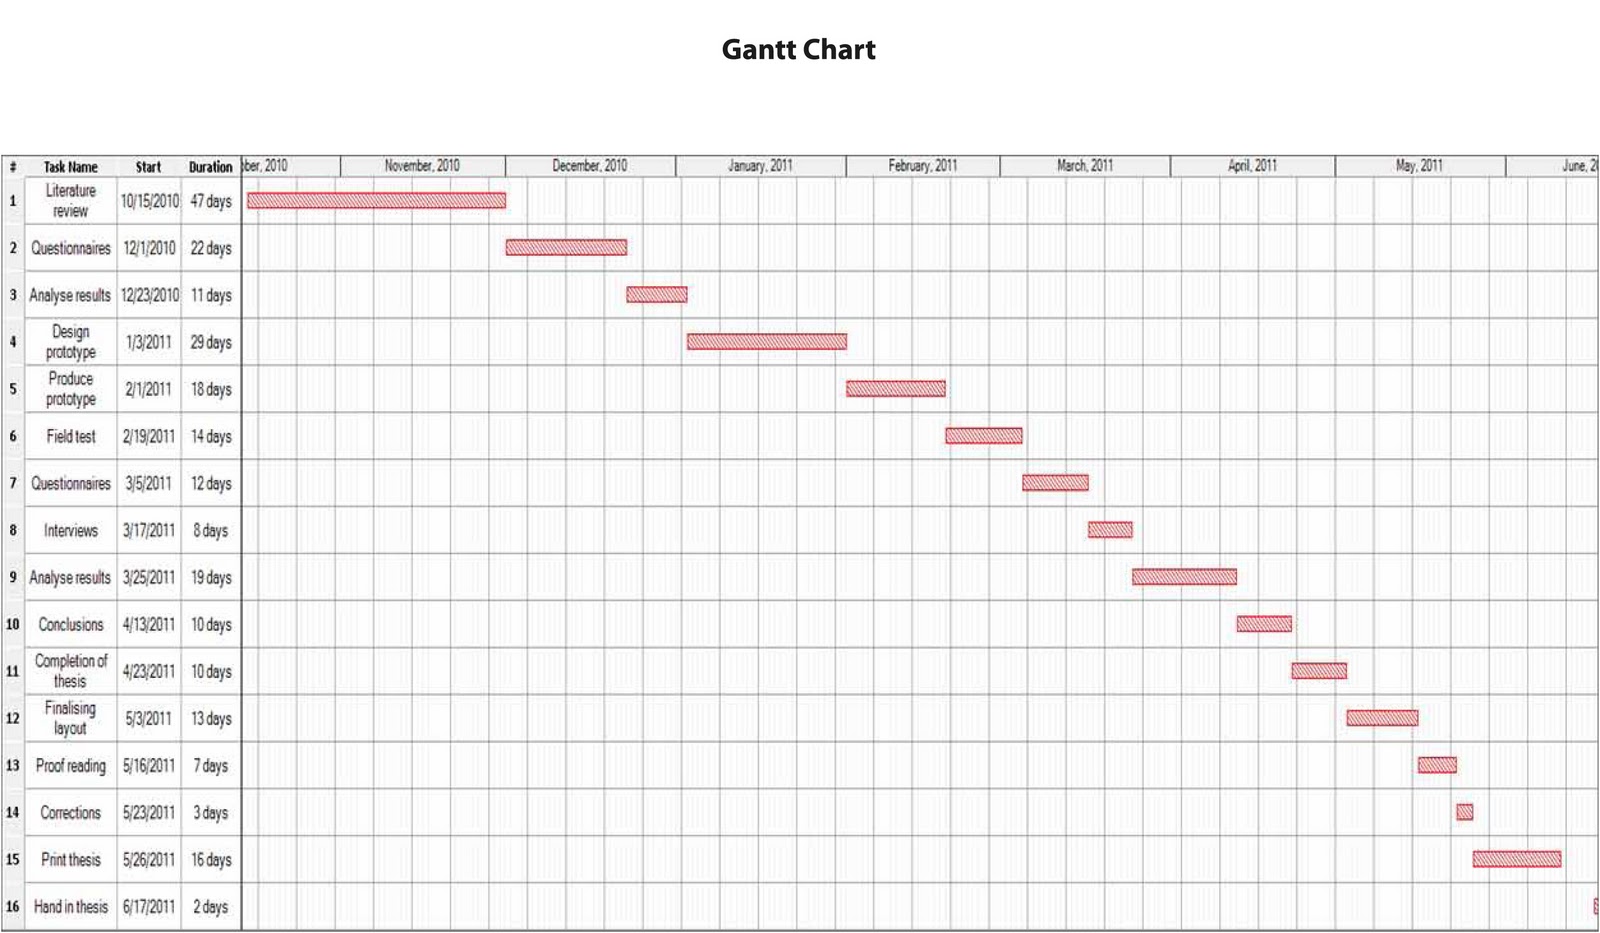 Gantt Chart Sample For Thesis Phd - Thesis Title Ideas for College